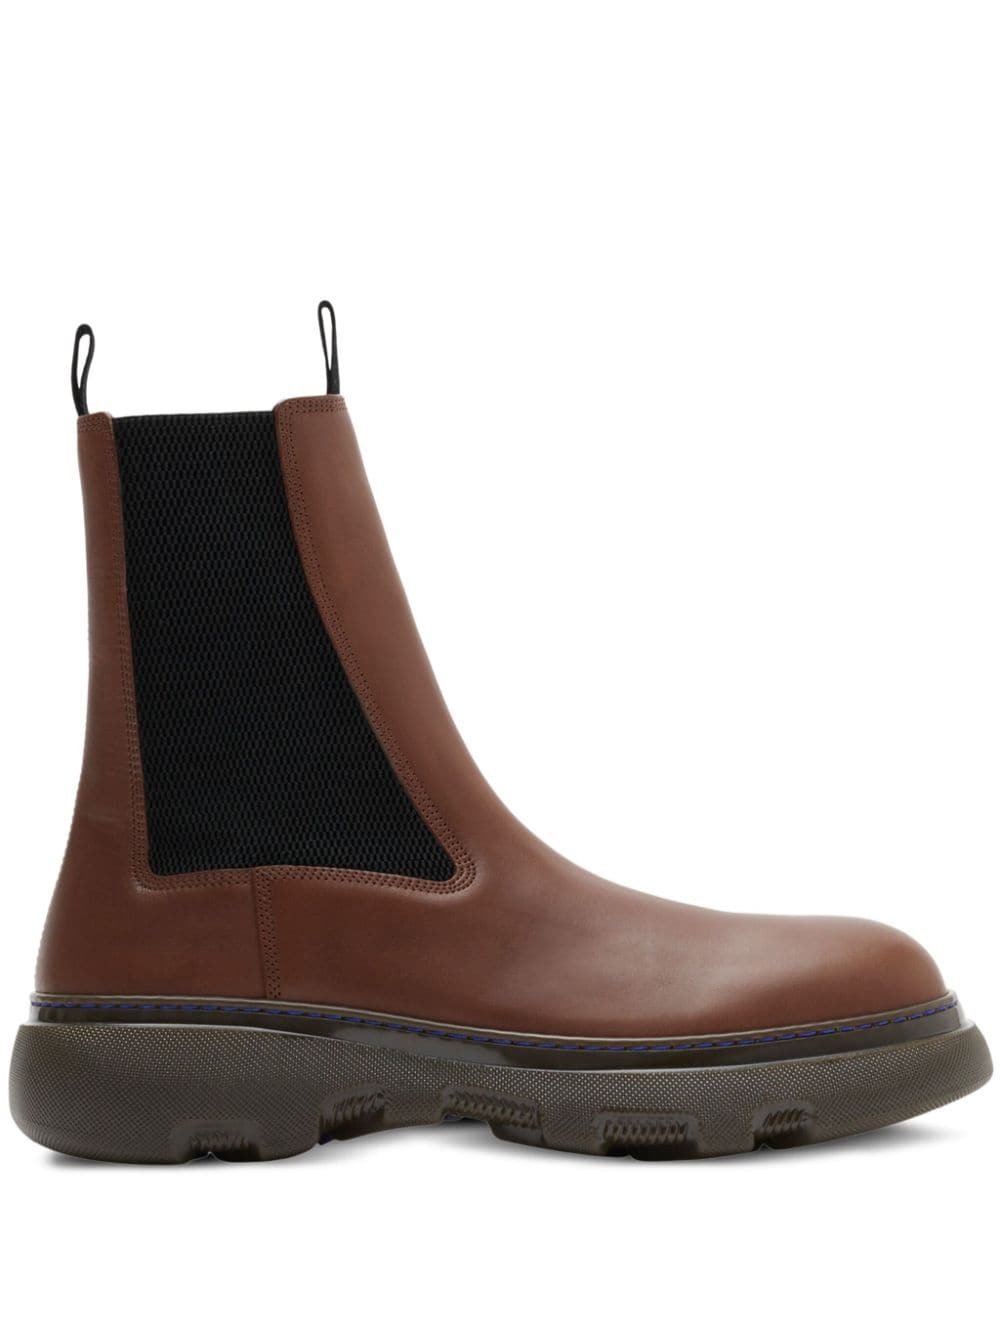 Burberry Creeper leather Chelsea boots - Brown von Burberry